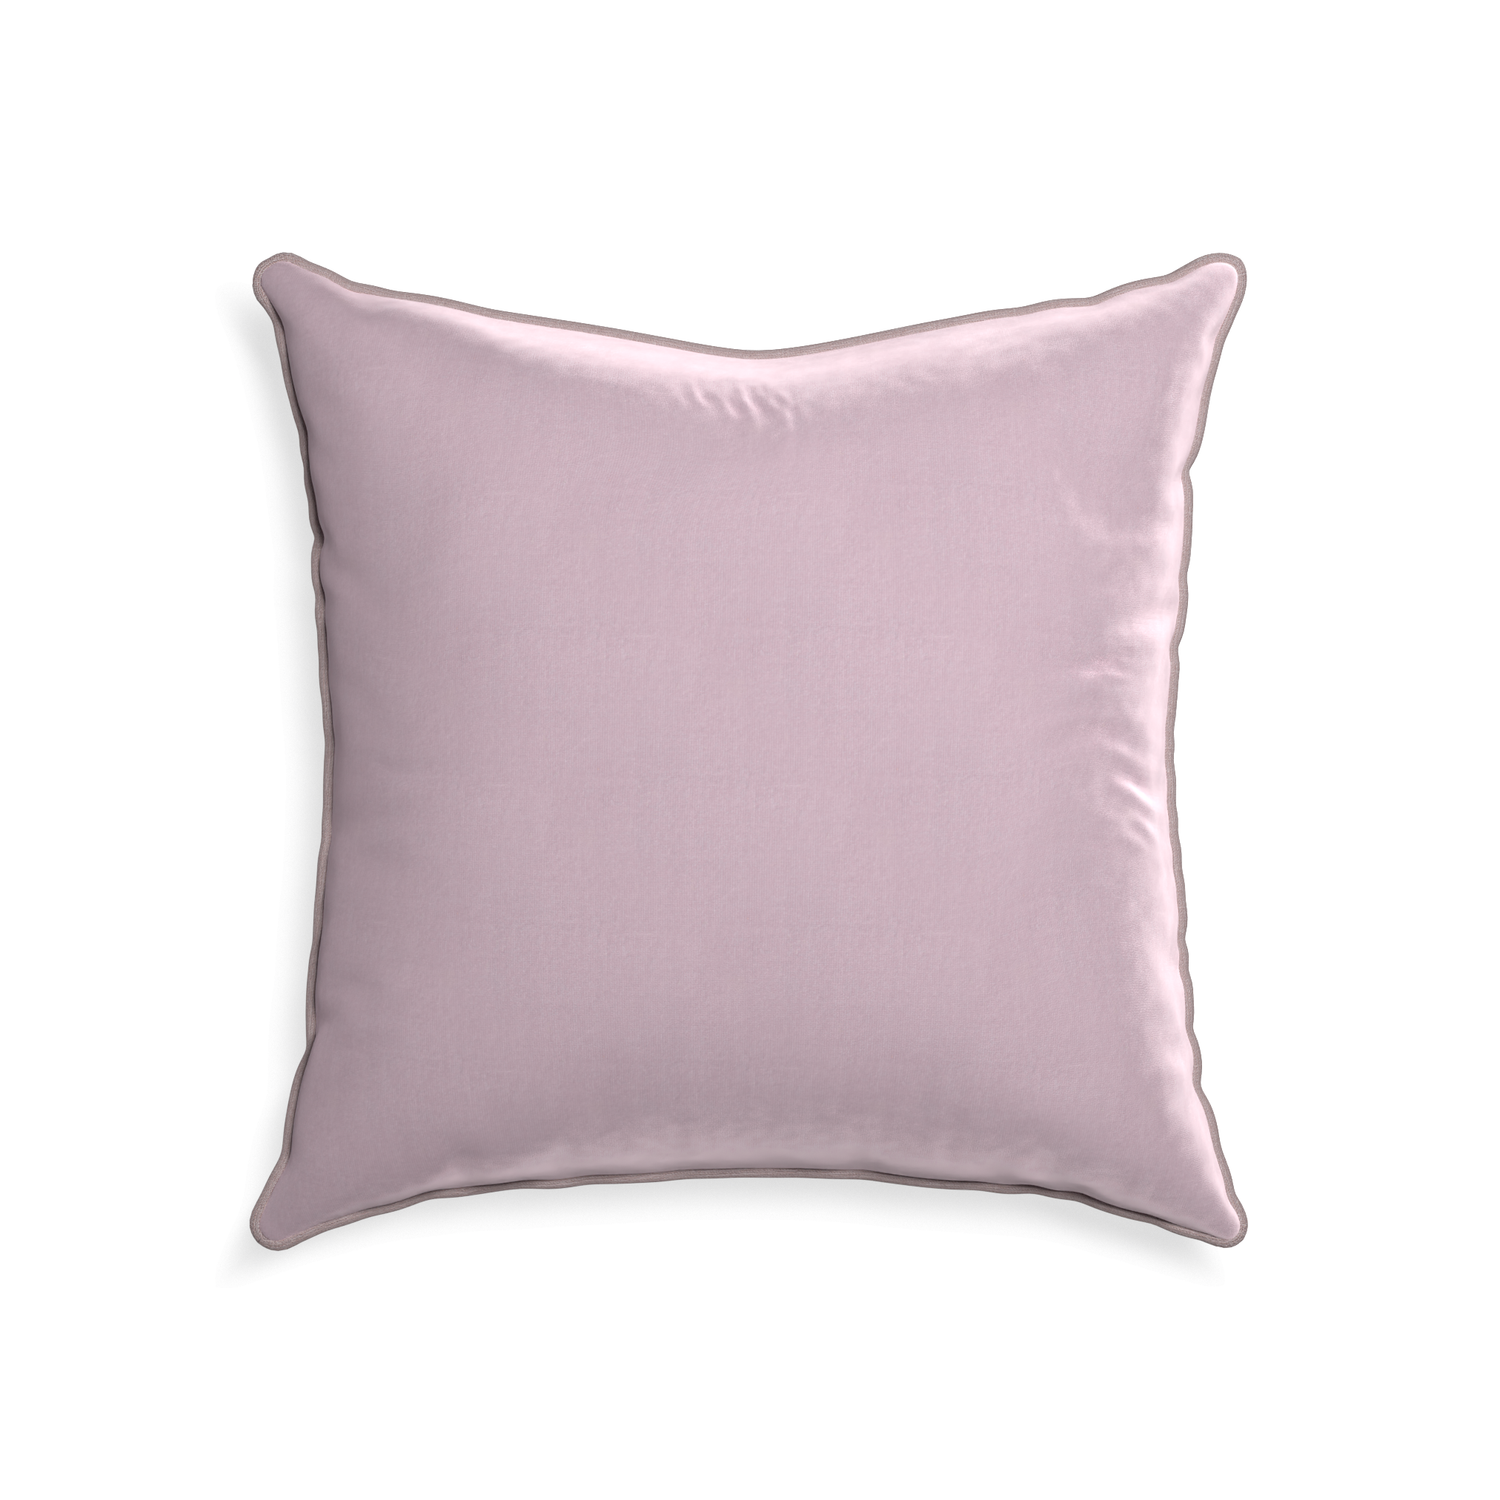 22-square lilac velvet custom lilacpillow with orchid piping on white background